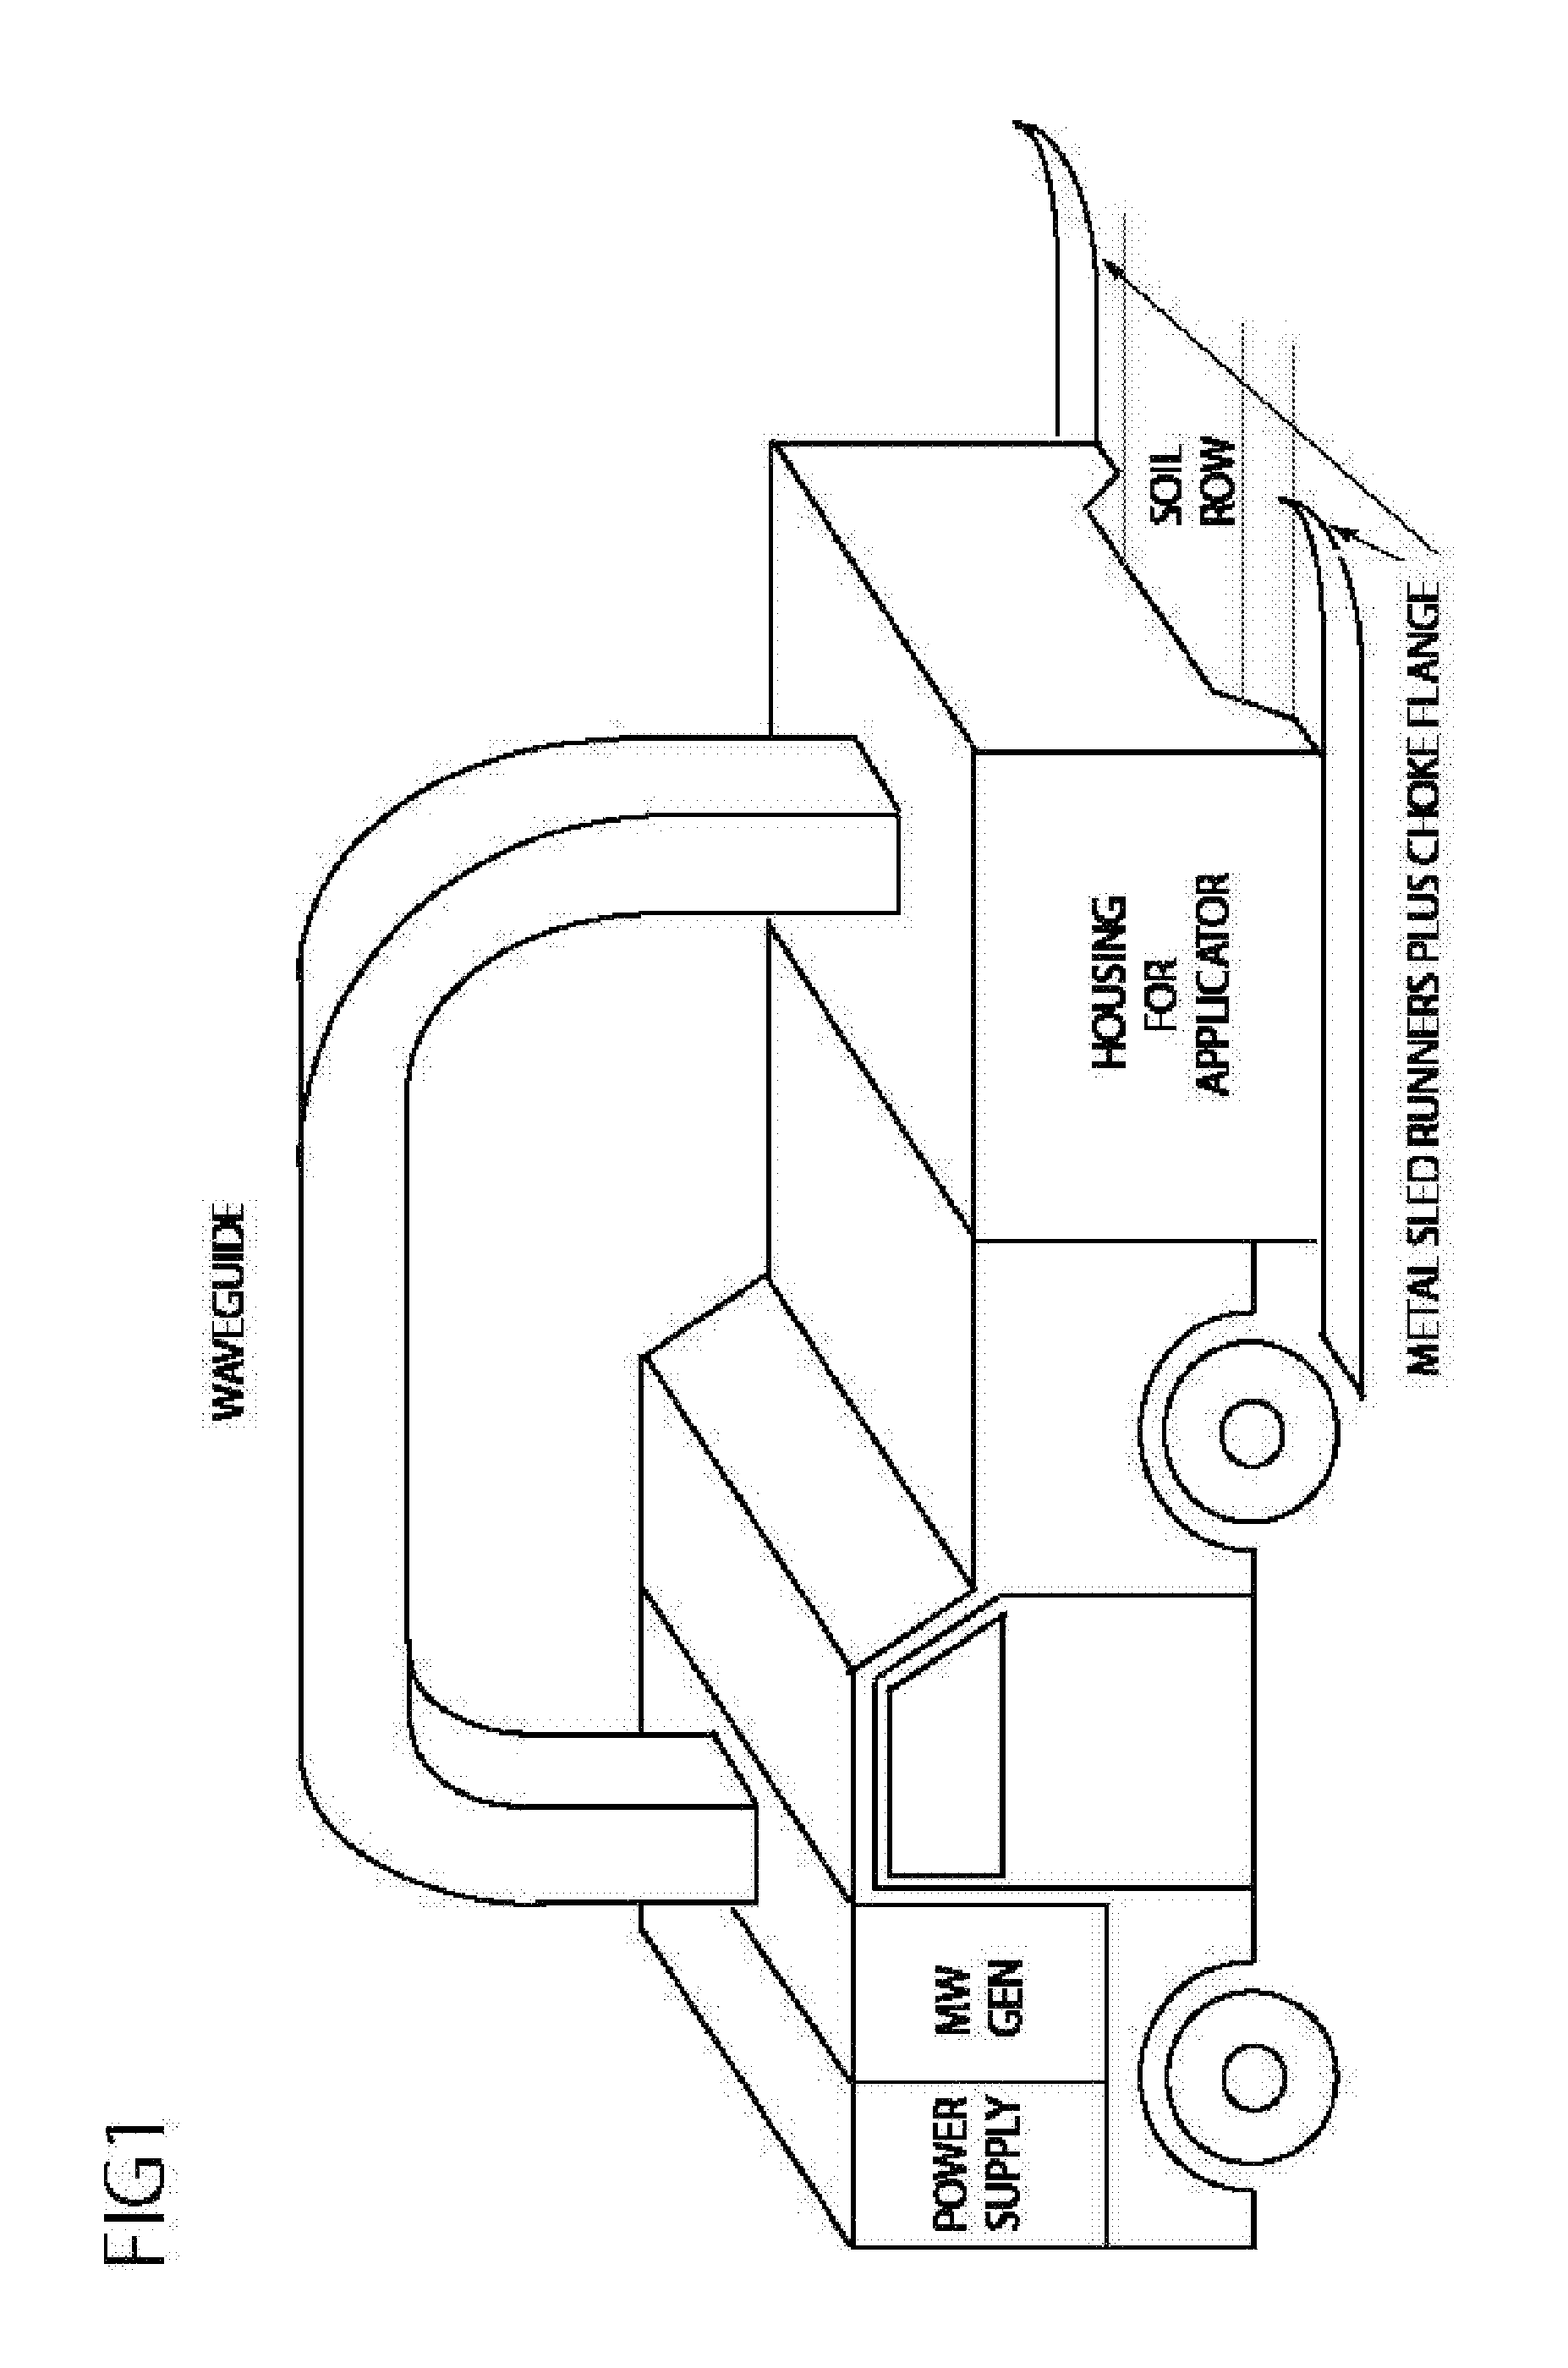 Microwave system and method for controlling the sterilization and infestation of crop soils